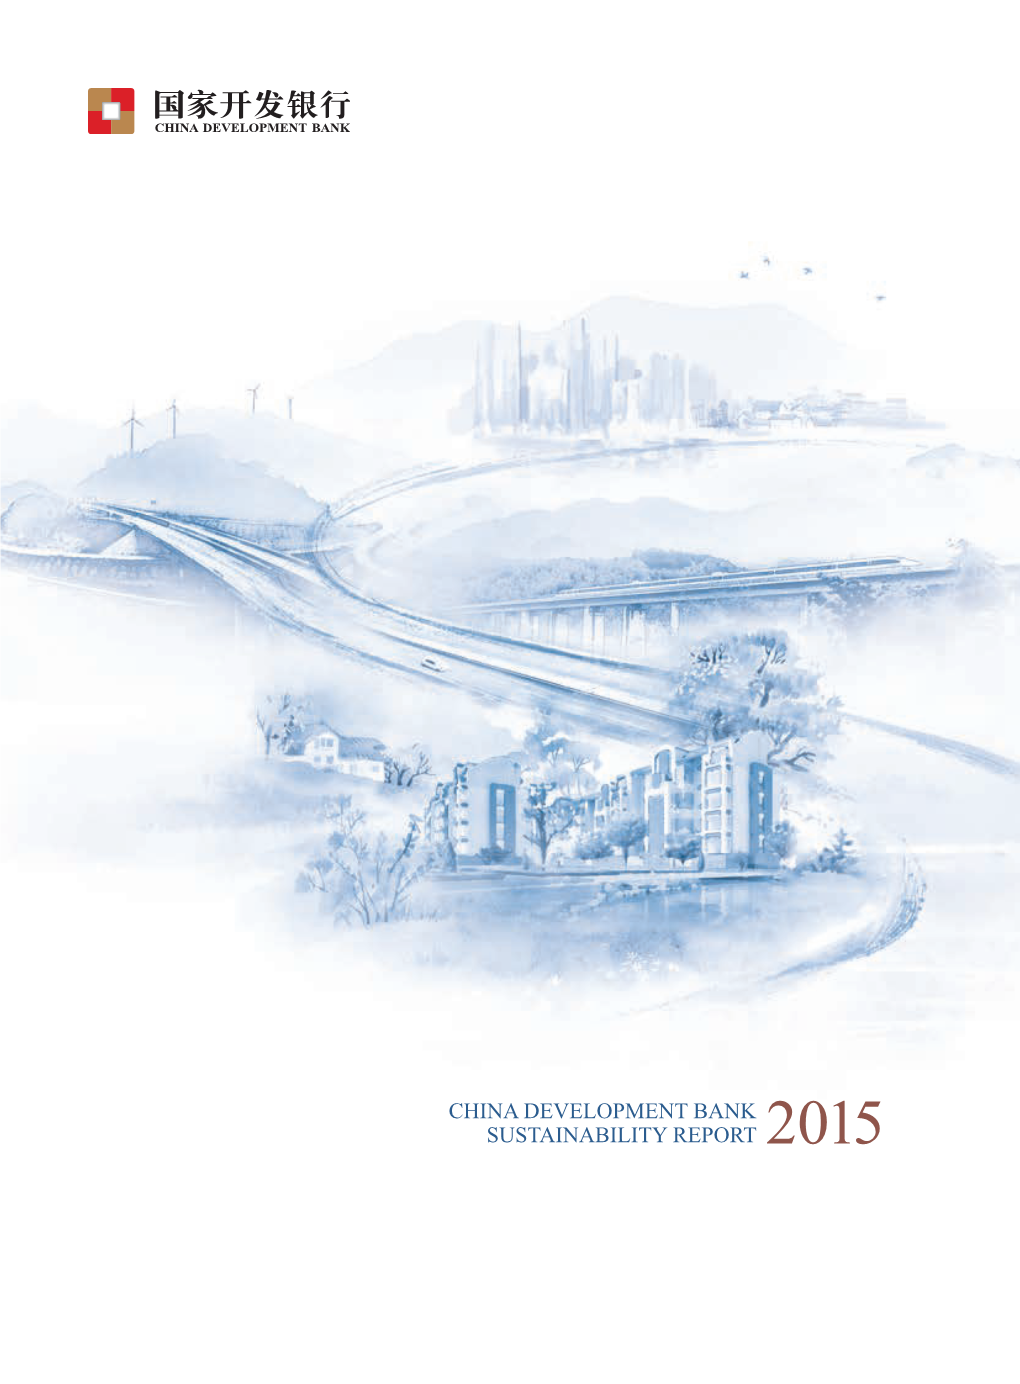 China Development Bank Sustainability Report 2015 Sustainability Report 2015 Contents